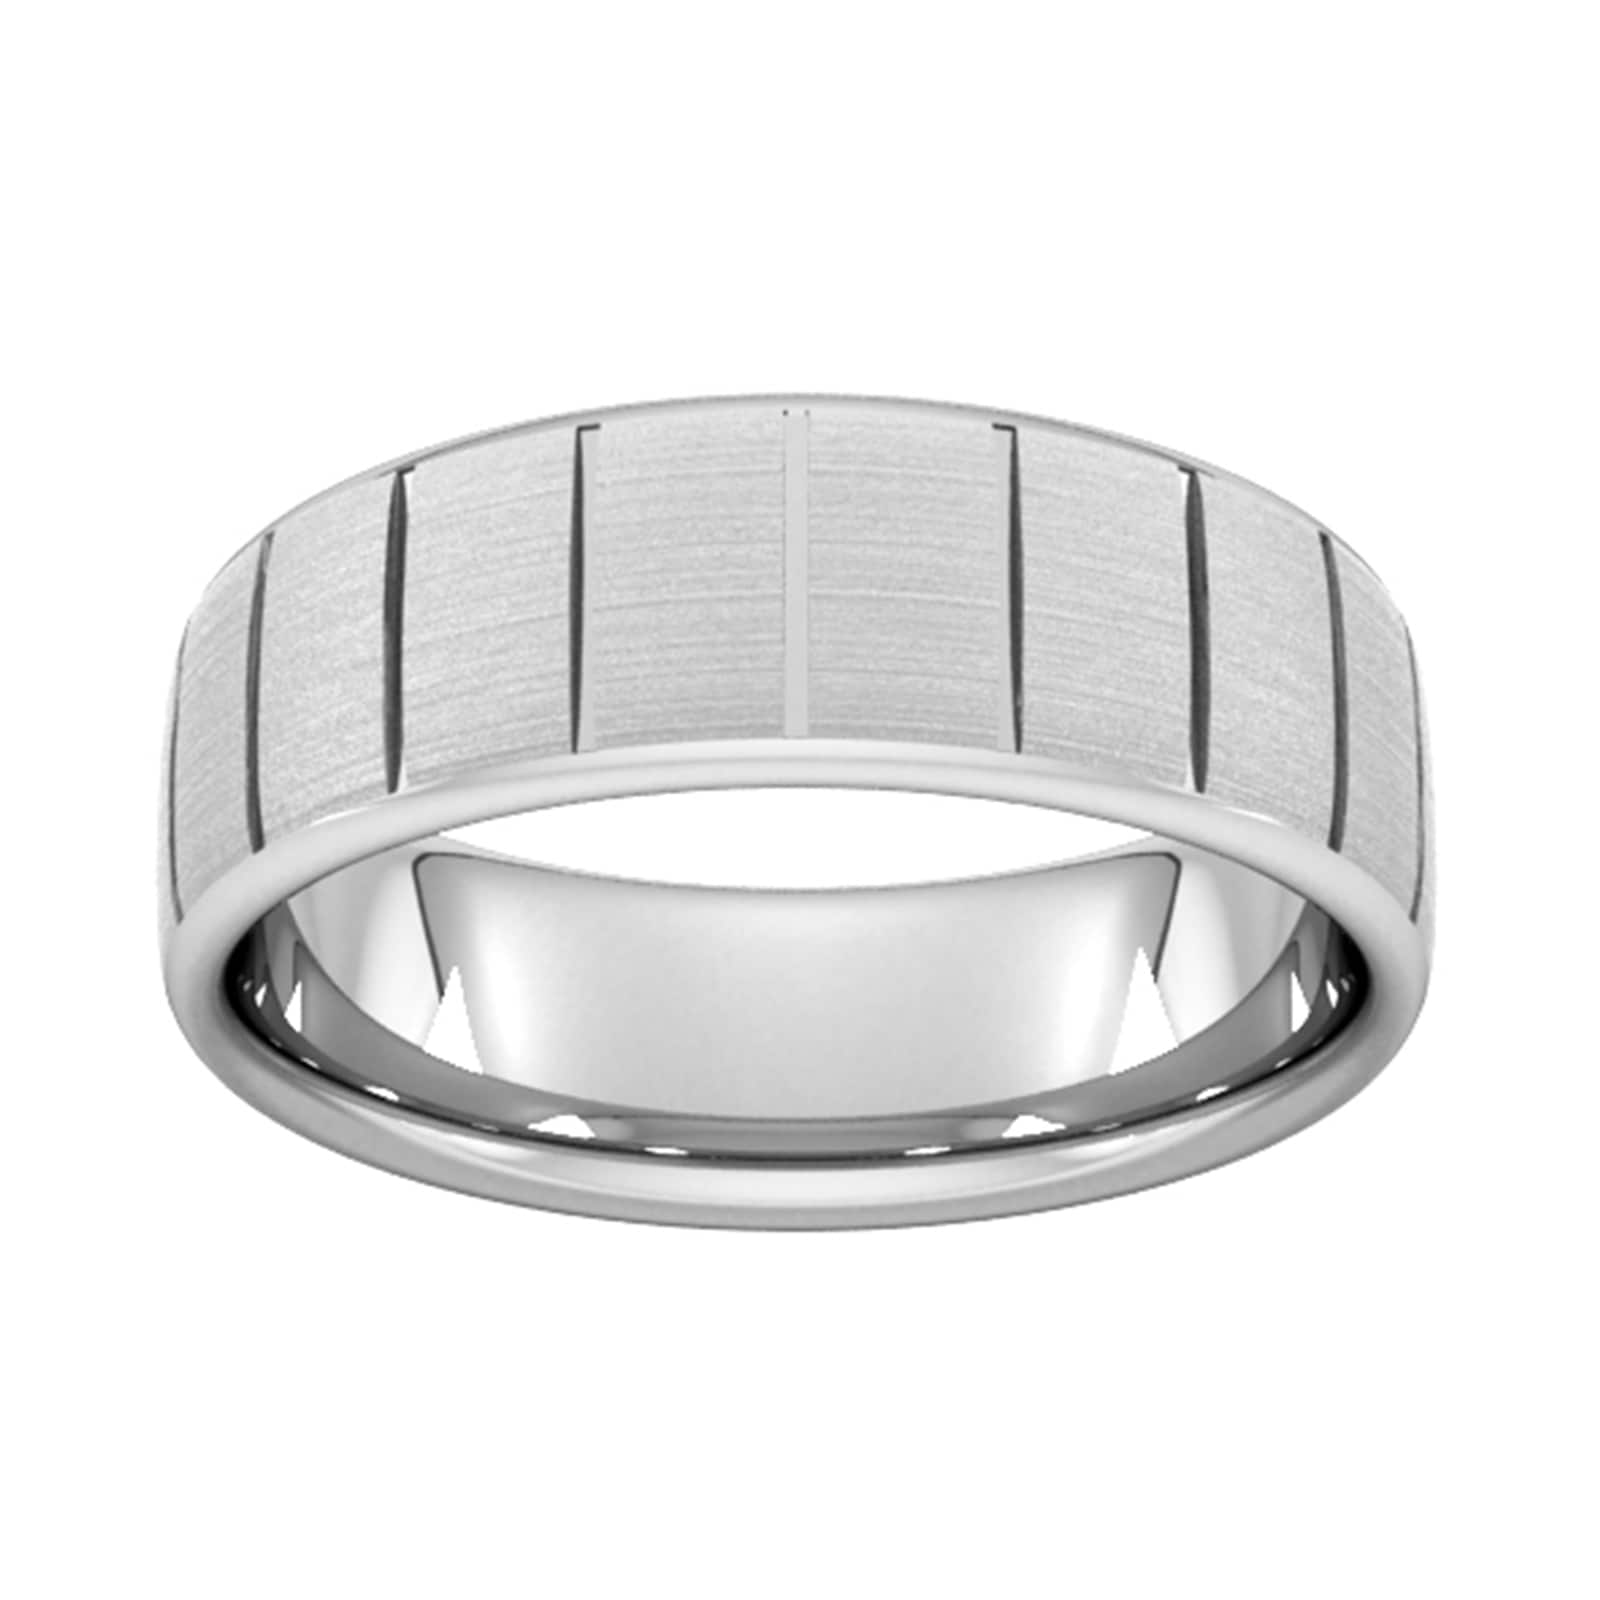 7mm Slight Court Standard Vertical Lines Wedding Ring In 9 Carat White Gold - Ring Size N